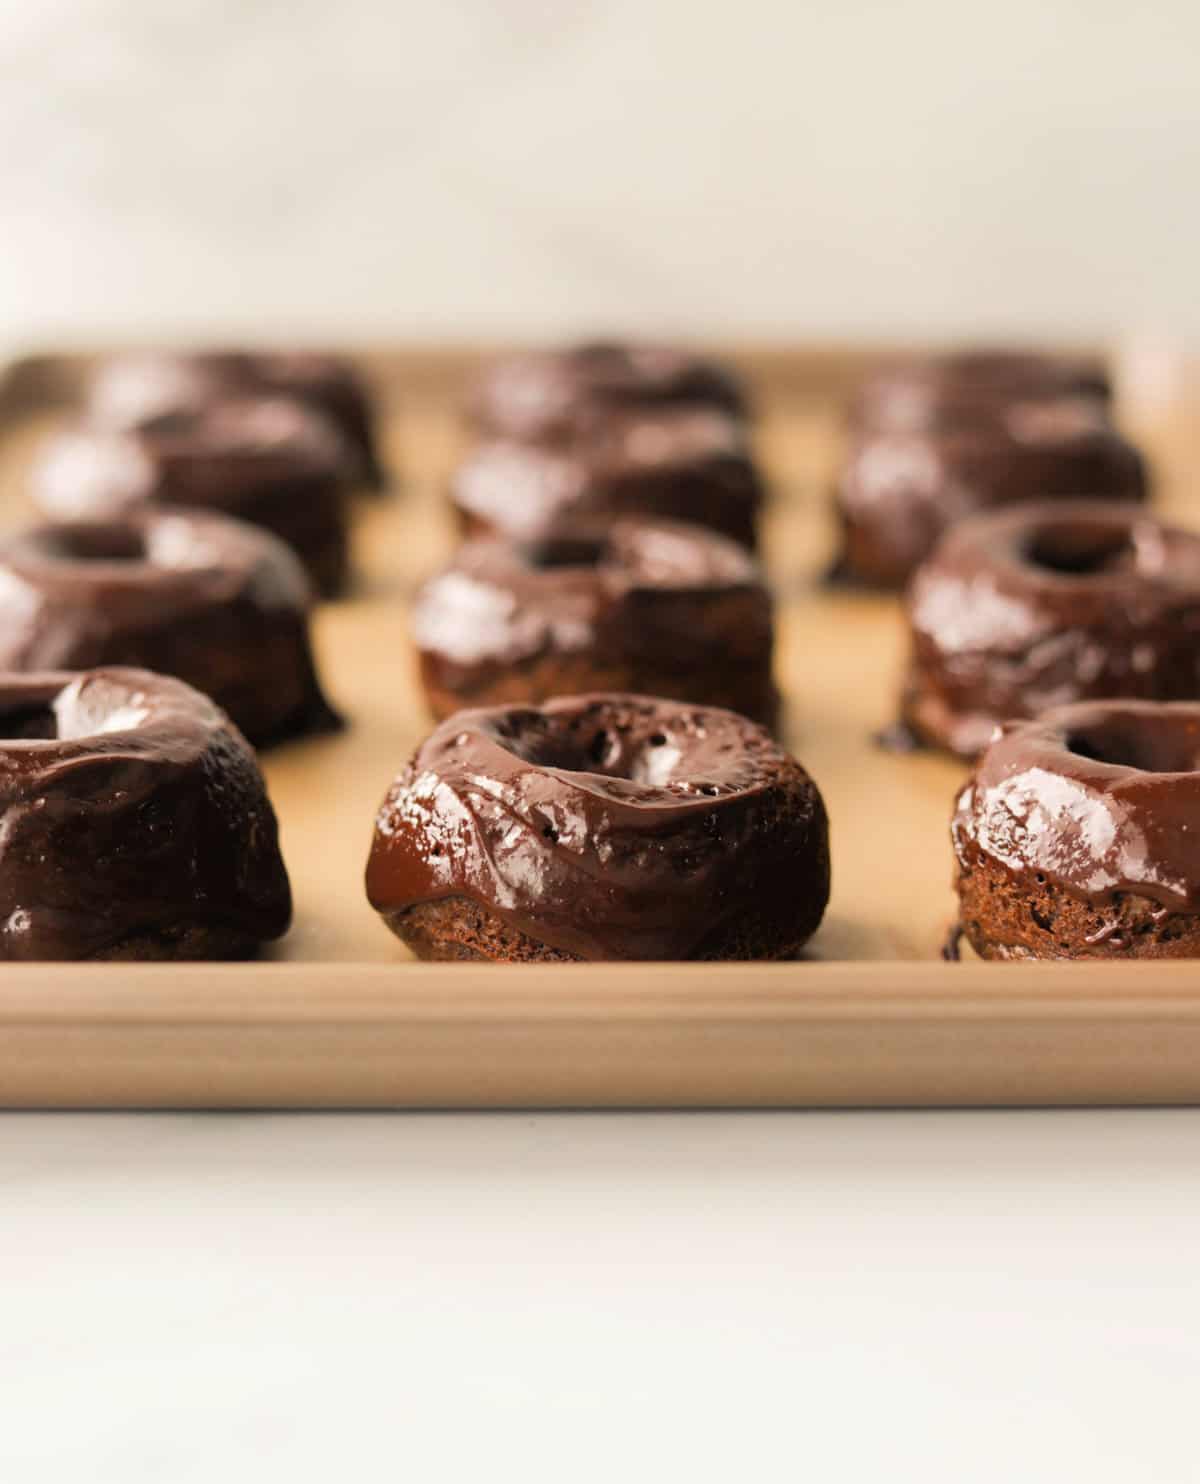 A front shot close up of a chocolate donut with chocolate glaze.